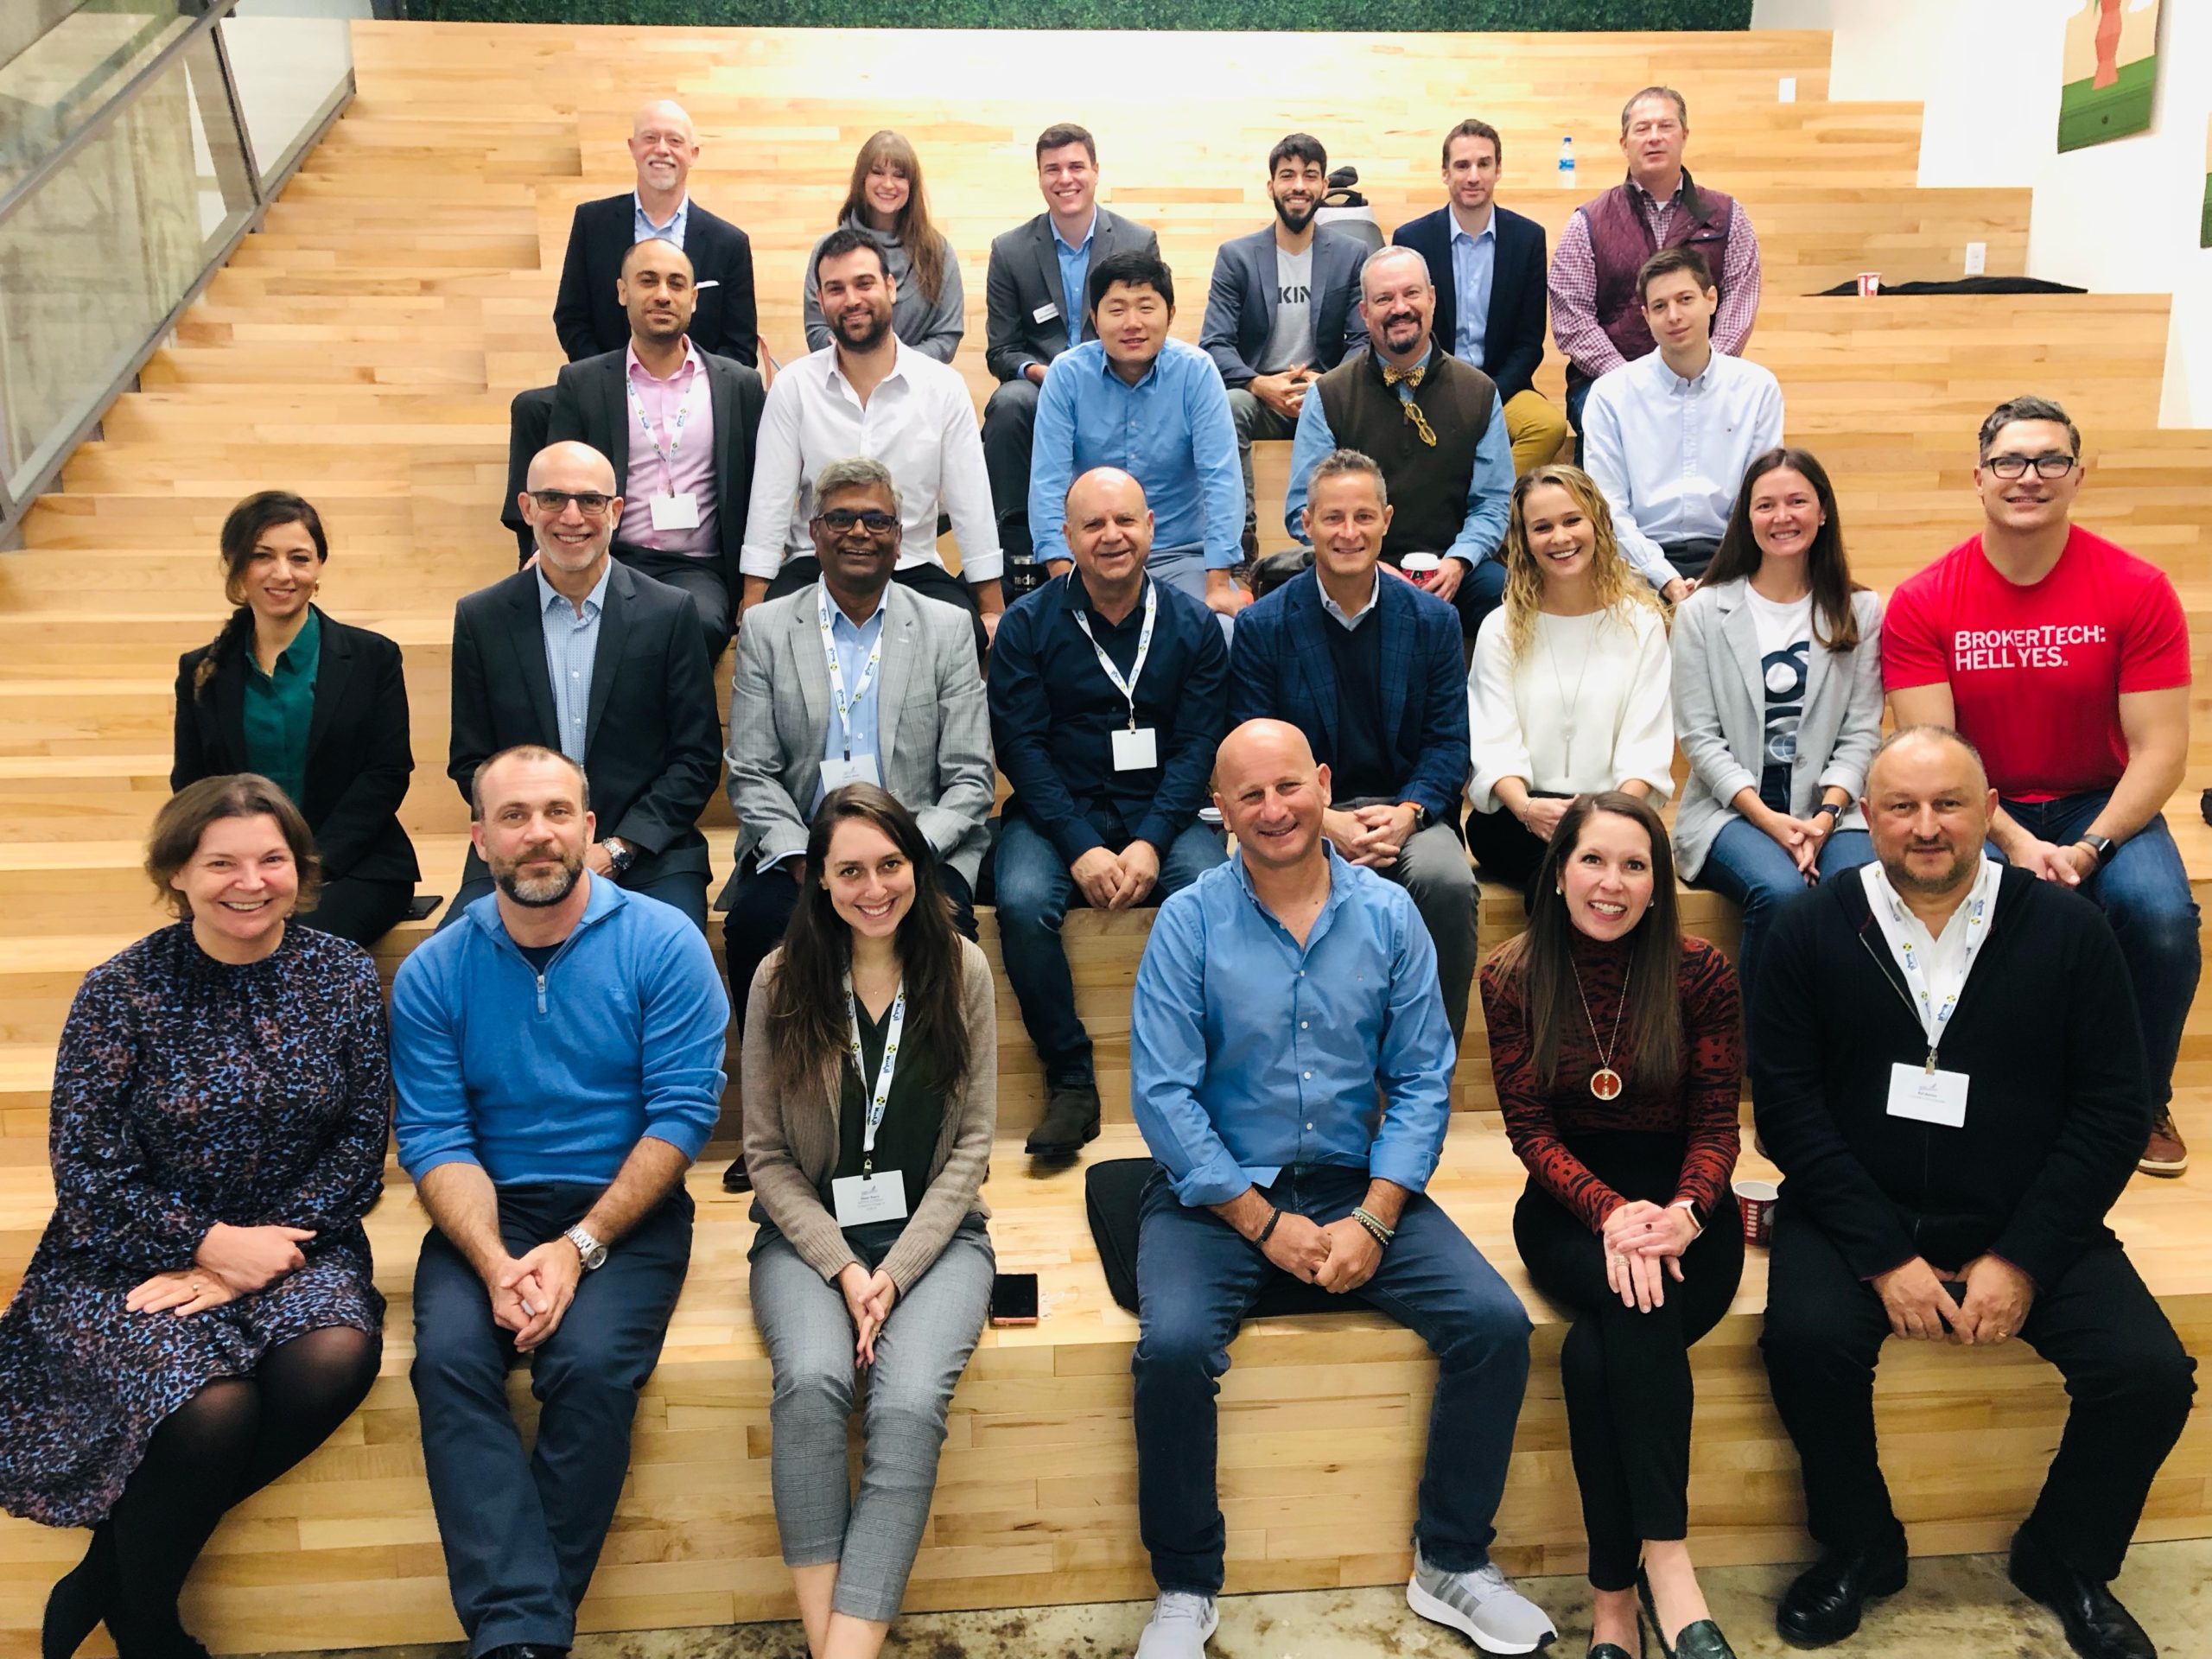 BrokerTech Ventures connects with Israeli accelerator during DSM visit